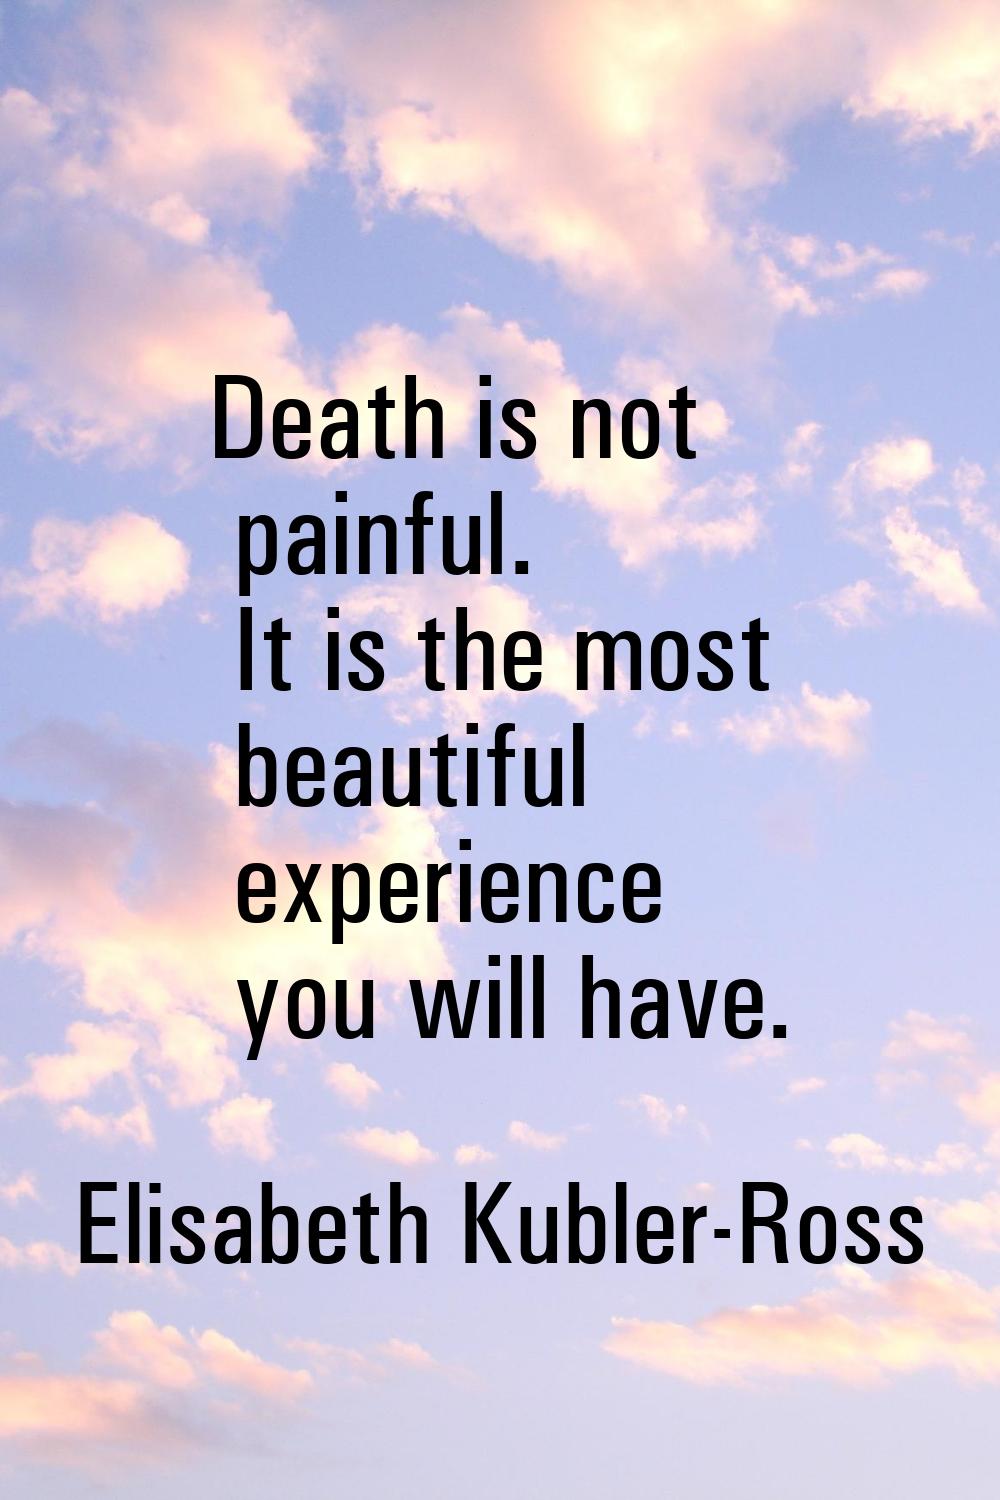 Death is not painful. It is the most beautiful experience you will have.